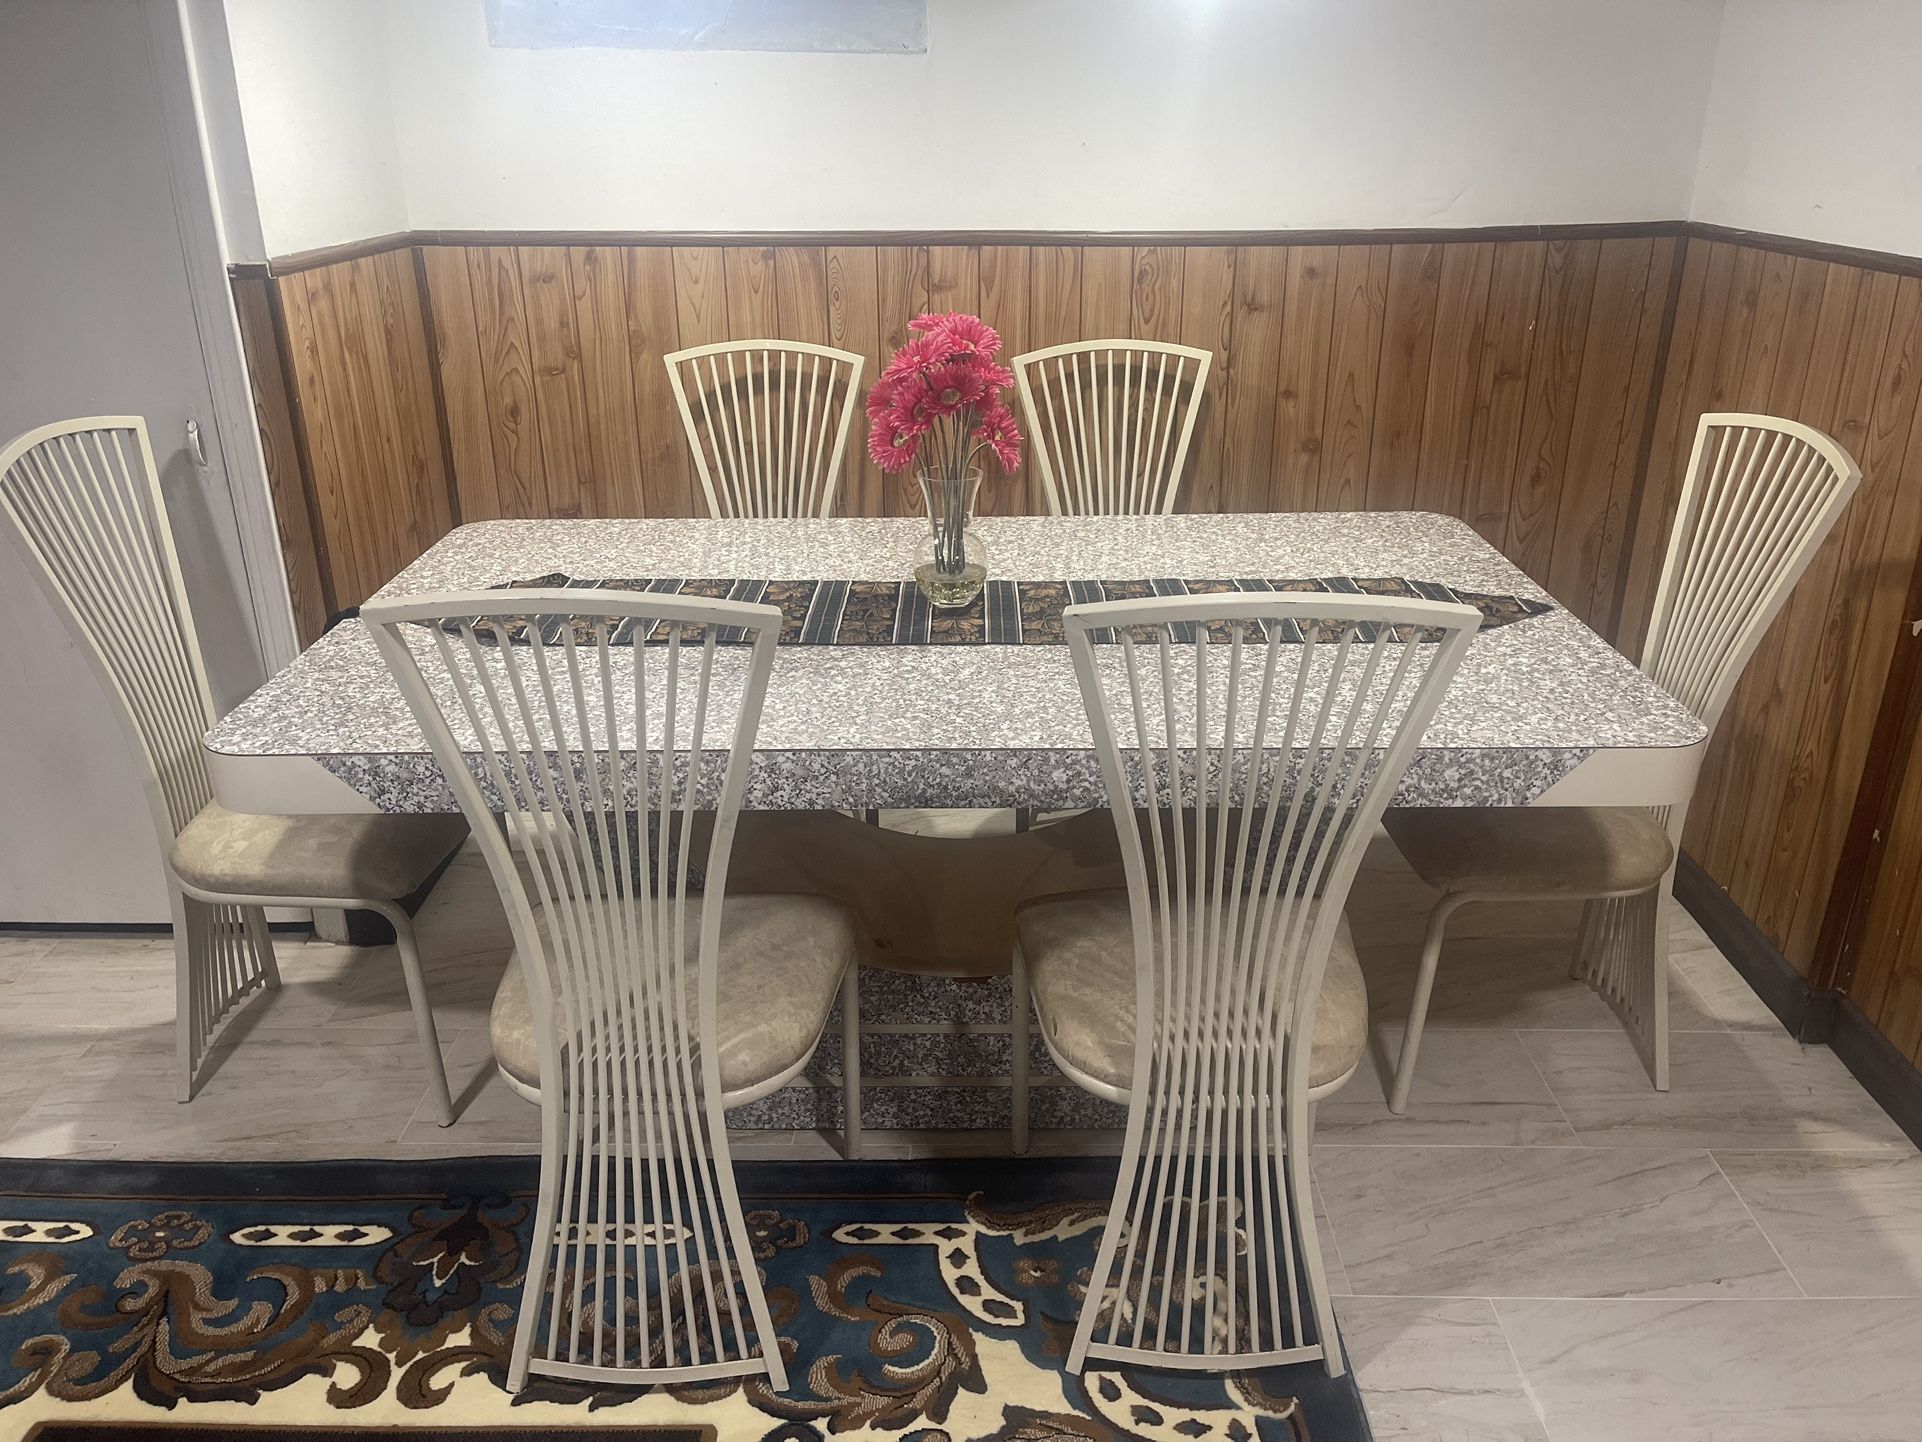 Beautiful table with 6 chairs